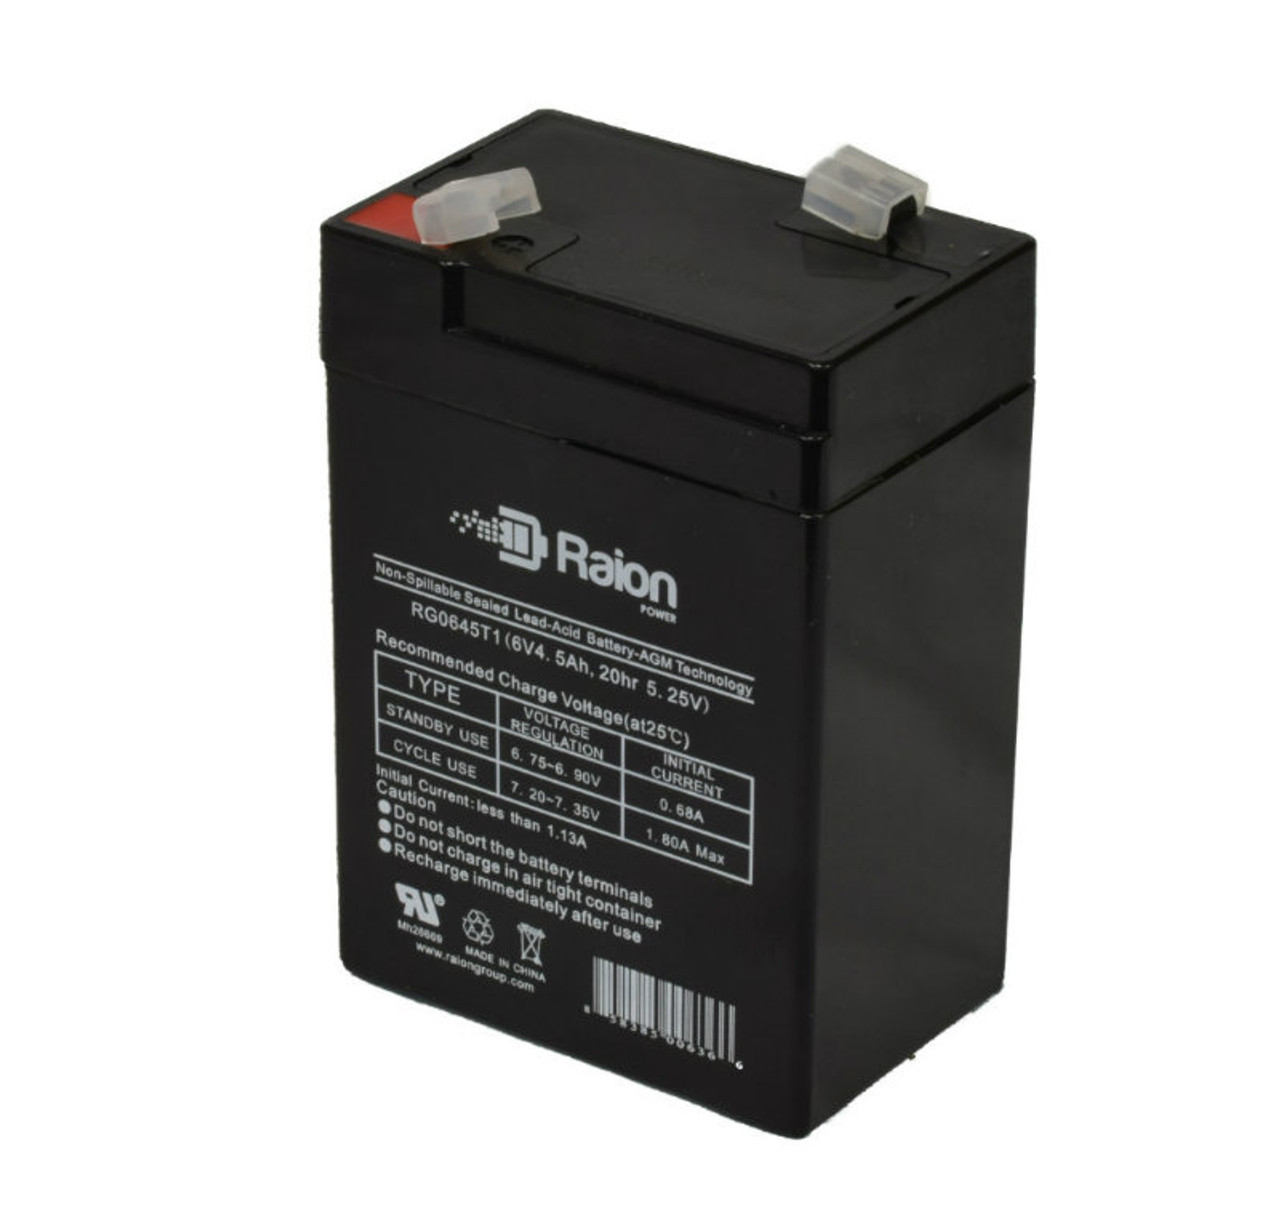 Raion Power RG0645T1 6V 4.5Ah Replacement Battery Cartridge for Criticare Systems TLCO2